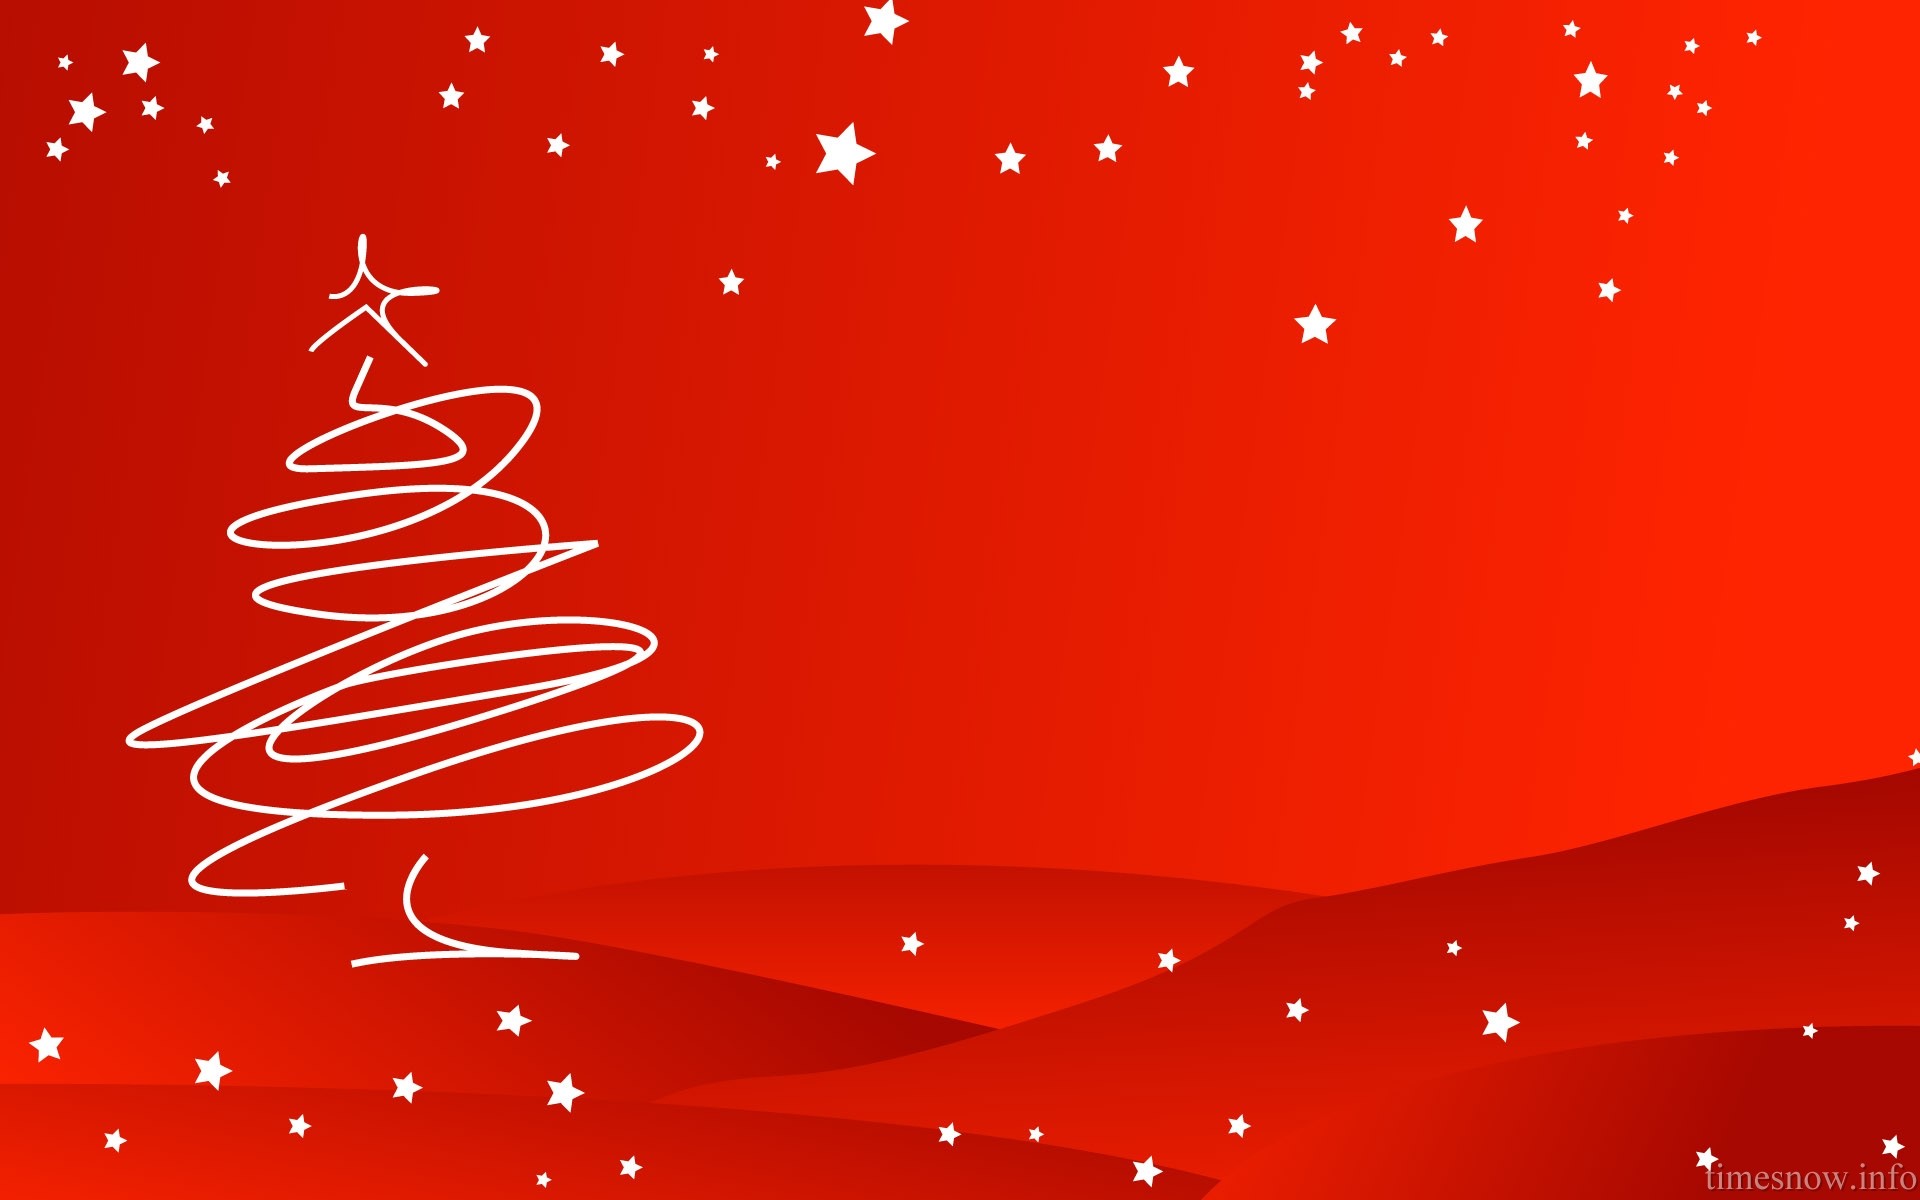 1920x1200 /images/holiday/christmas_wallpapers/xmas-lineart-red-